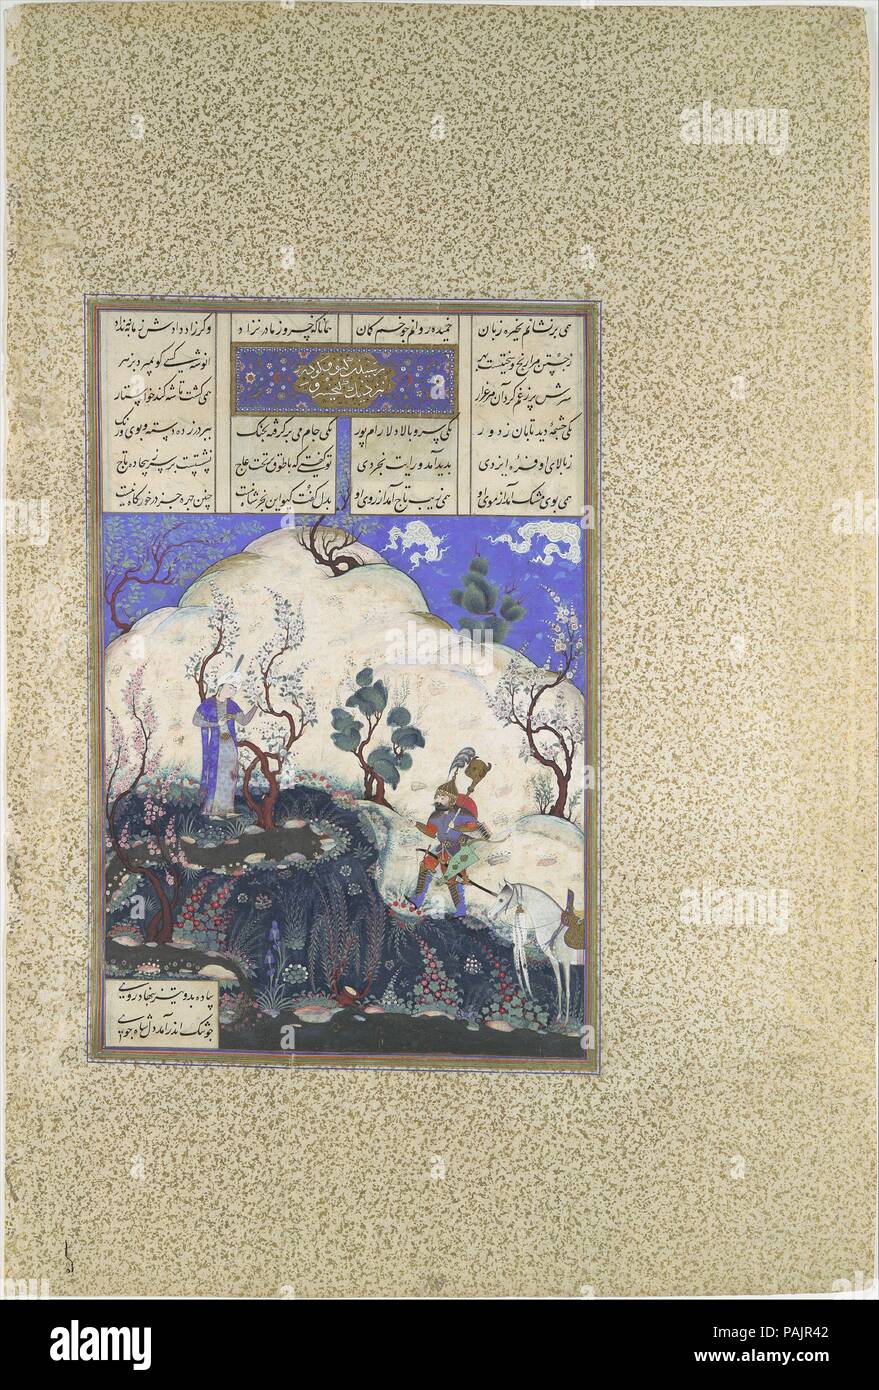 'Kai Khusrau is Discovered by Giv', Folio 210v from the Shahnama (Book of Kings) of Shah Tahmasp. Artist: Painting attributed to Qadimi (active ca. 1525-65) , and 'Abd al-Vahhab. Author: Abu'l Qasim Firdausi (935-1020). Dimensions: Painting: H. 11 1/8 in. (28.3 cm)   W. 7 7/16 in. (18.9 cm)  Page: H. 18 9/16 in. (47.1 cm)   W. 12 1/8 in. (30.8 cm)  Mat: H. 22 in. (55.9 cm)   W. 16 in. (40.6 cm). Date: ca. 1525-30.  After a seven-year search for the future shah, the persistent Iranian knight Giv finally discovered the prince Kai Khusrau. Faithful to the story, the painting features an idyllic s Stock Photo